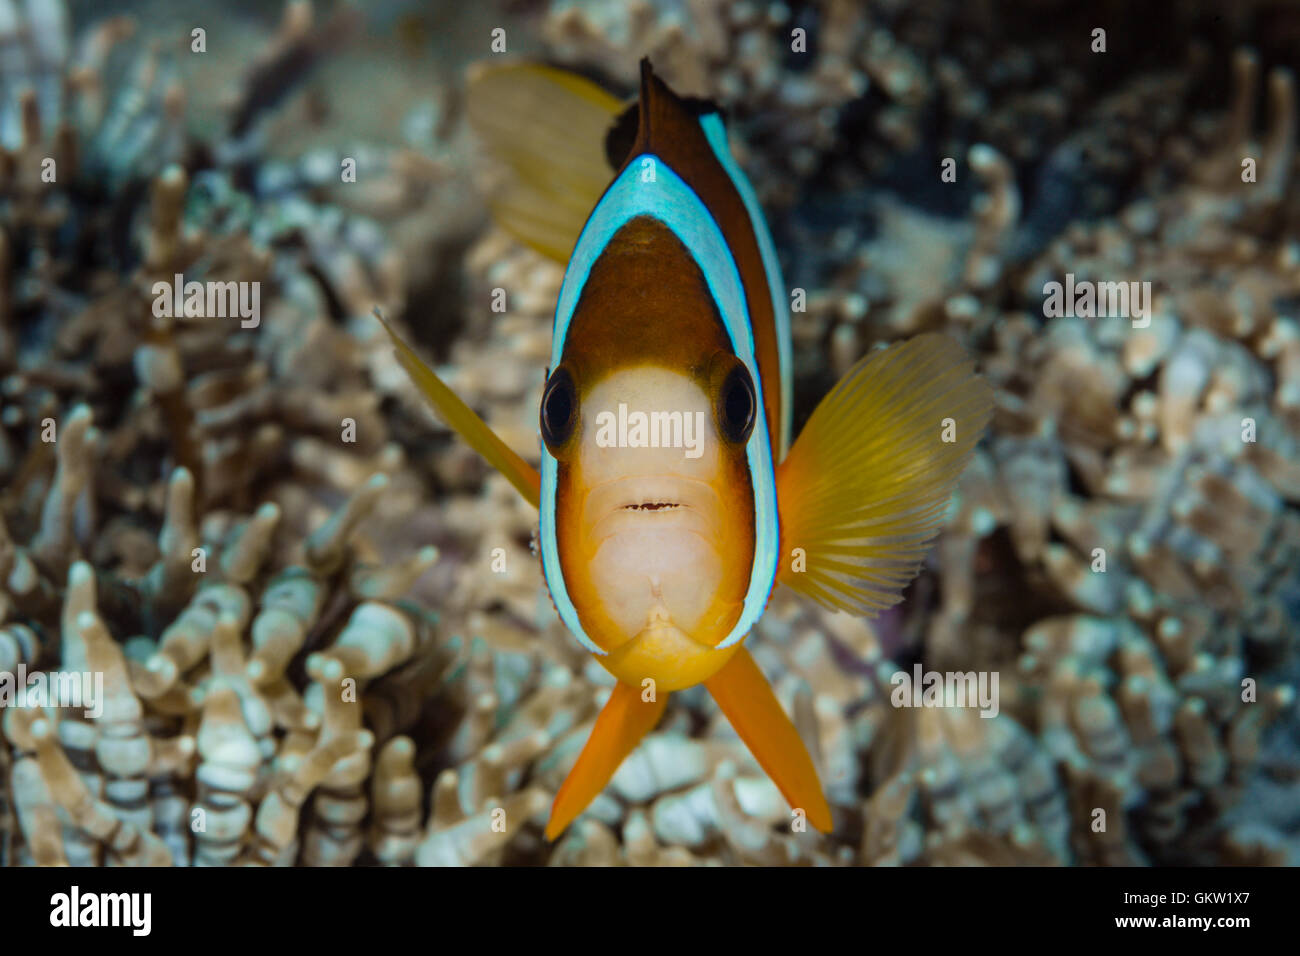 Clarks Anemonefish, Amphiprion clarkii, Ambon, Moluccas, Indonesia Stock Photo